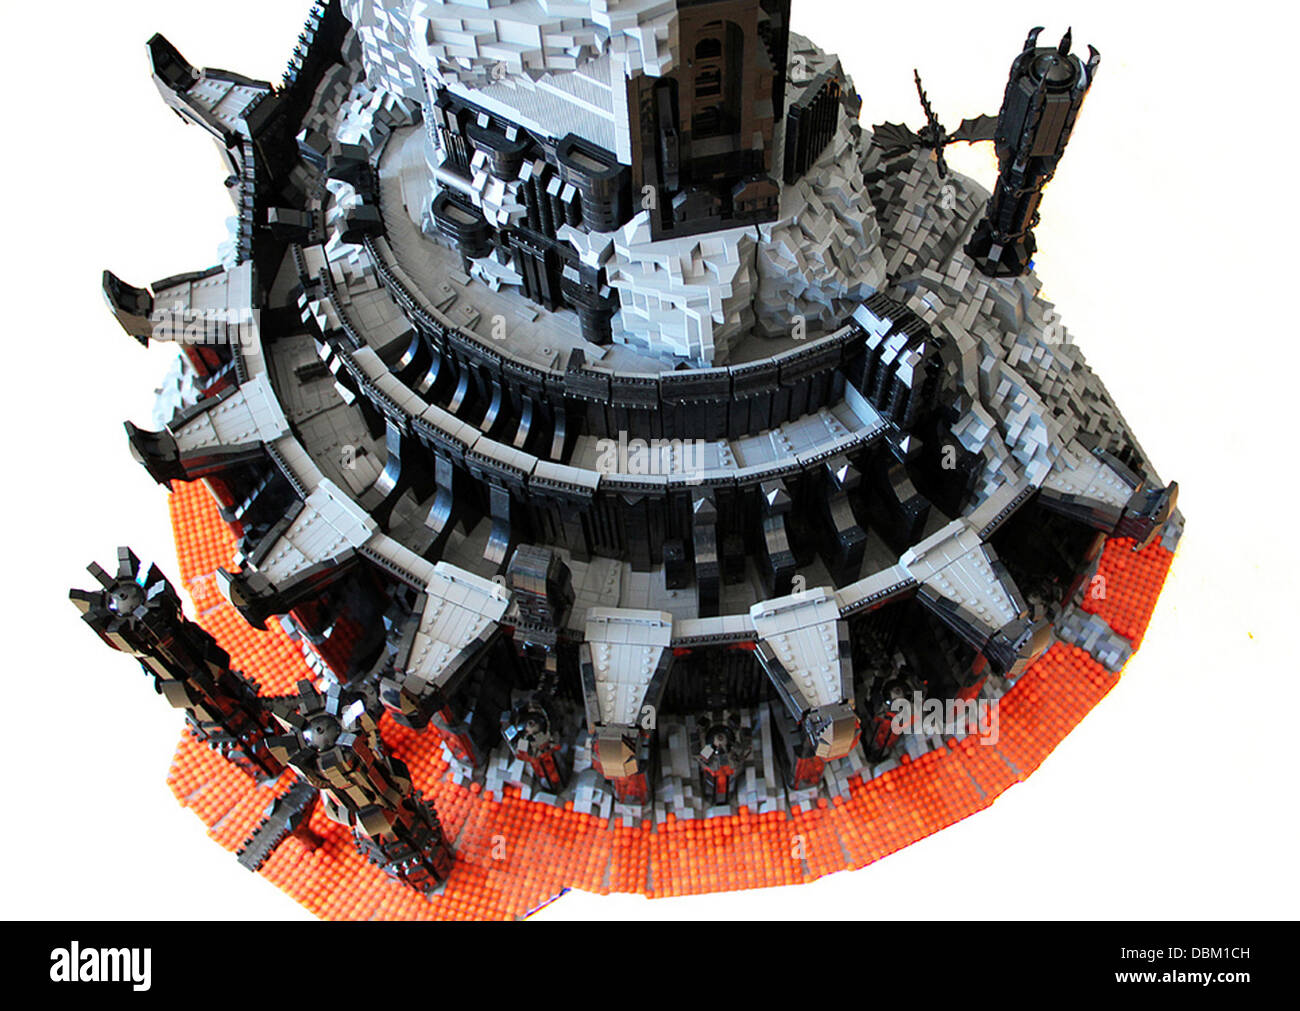 LEGO lover builds shrine to The Lord of the Rings. Kevin Walter has  reconstructed the fearsome tower of Mordor from The Lord of the Rings for  Brickworld 2011. Walter collaborated with 15